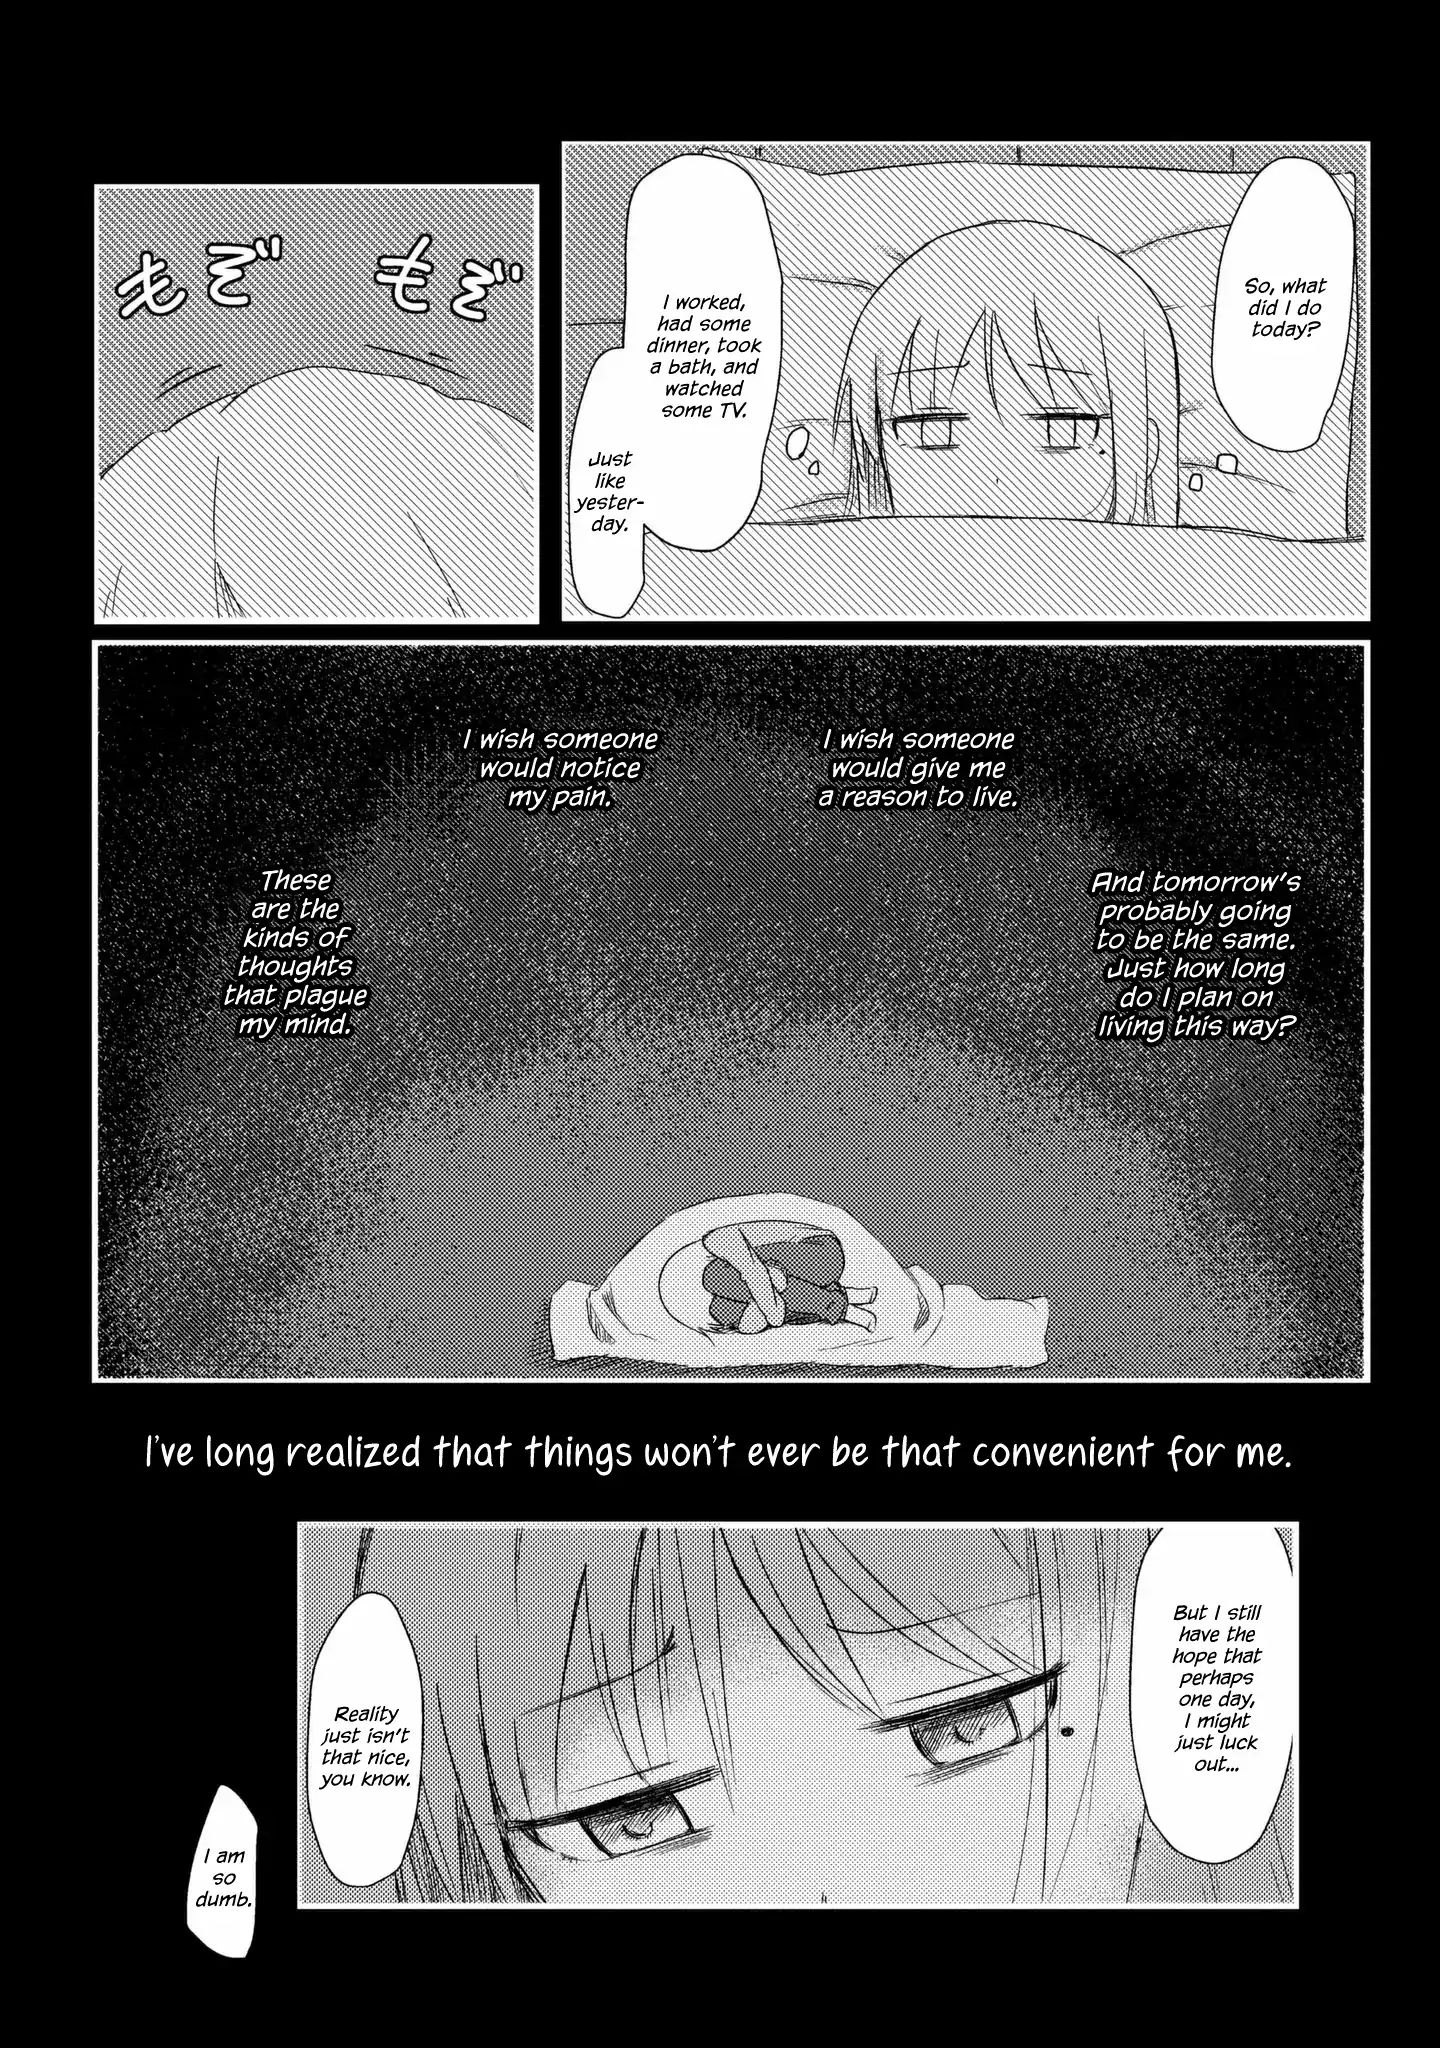 She Doesn't Know Why She Lives - Page 2